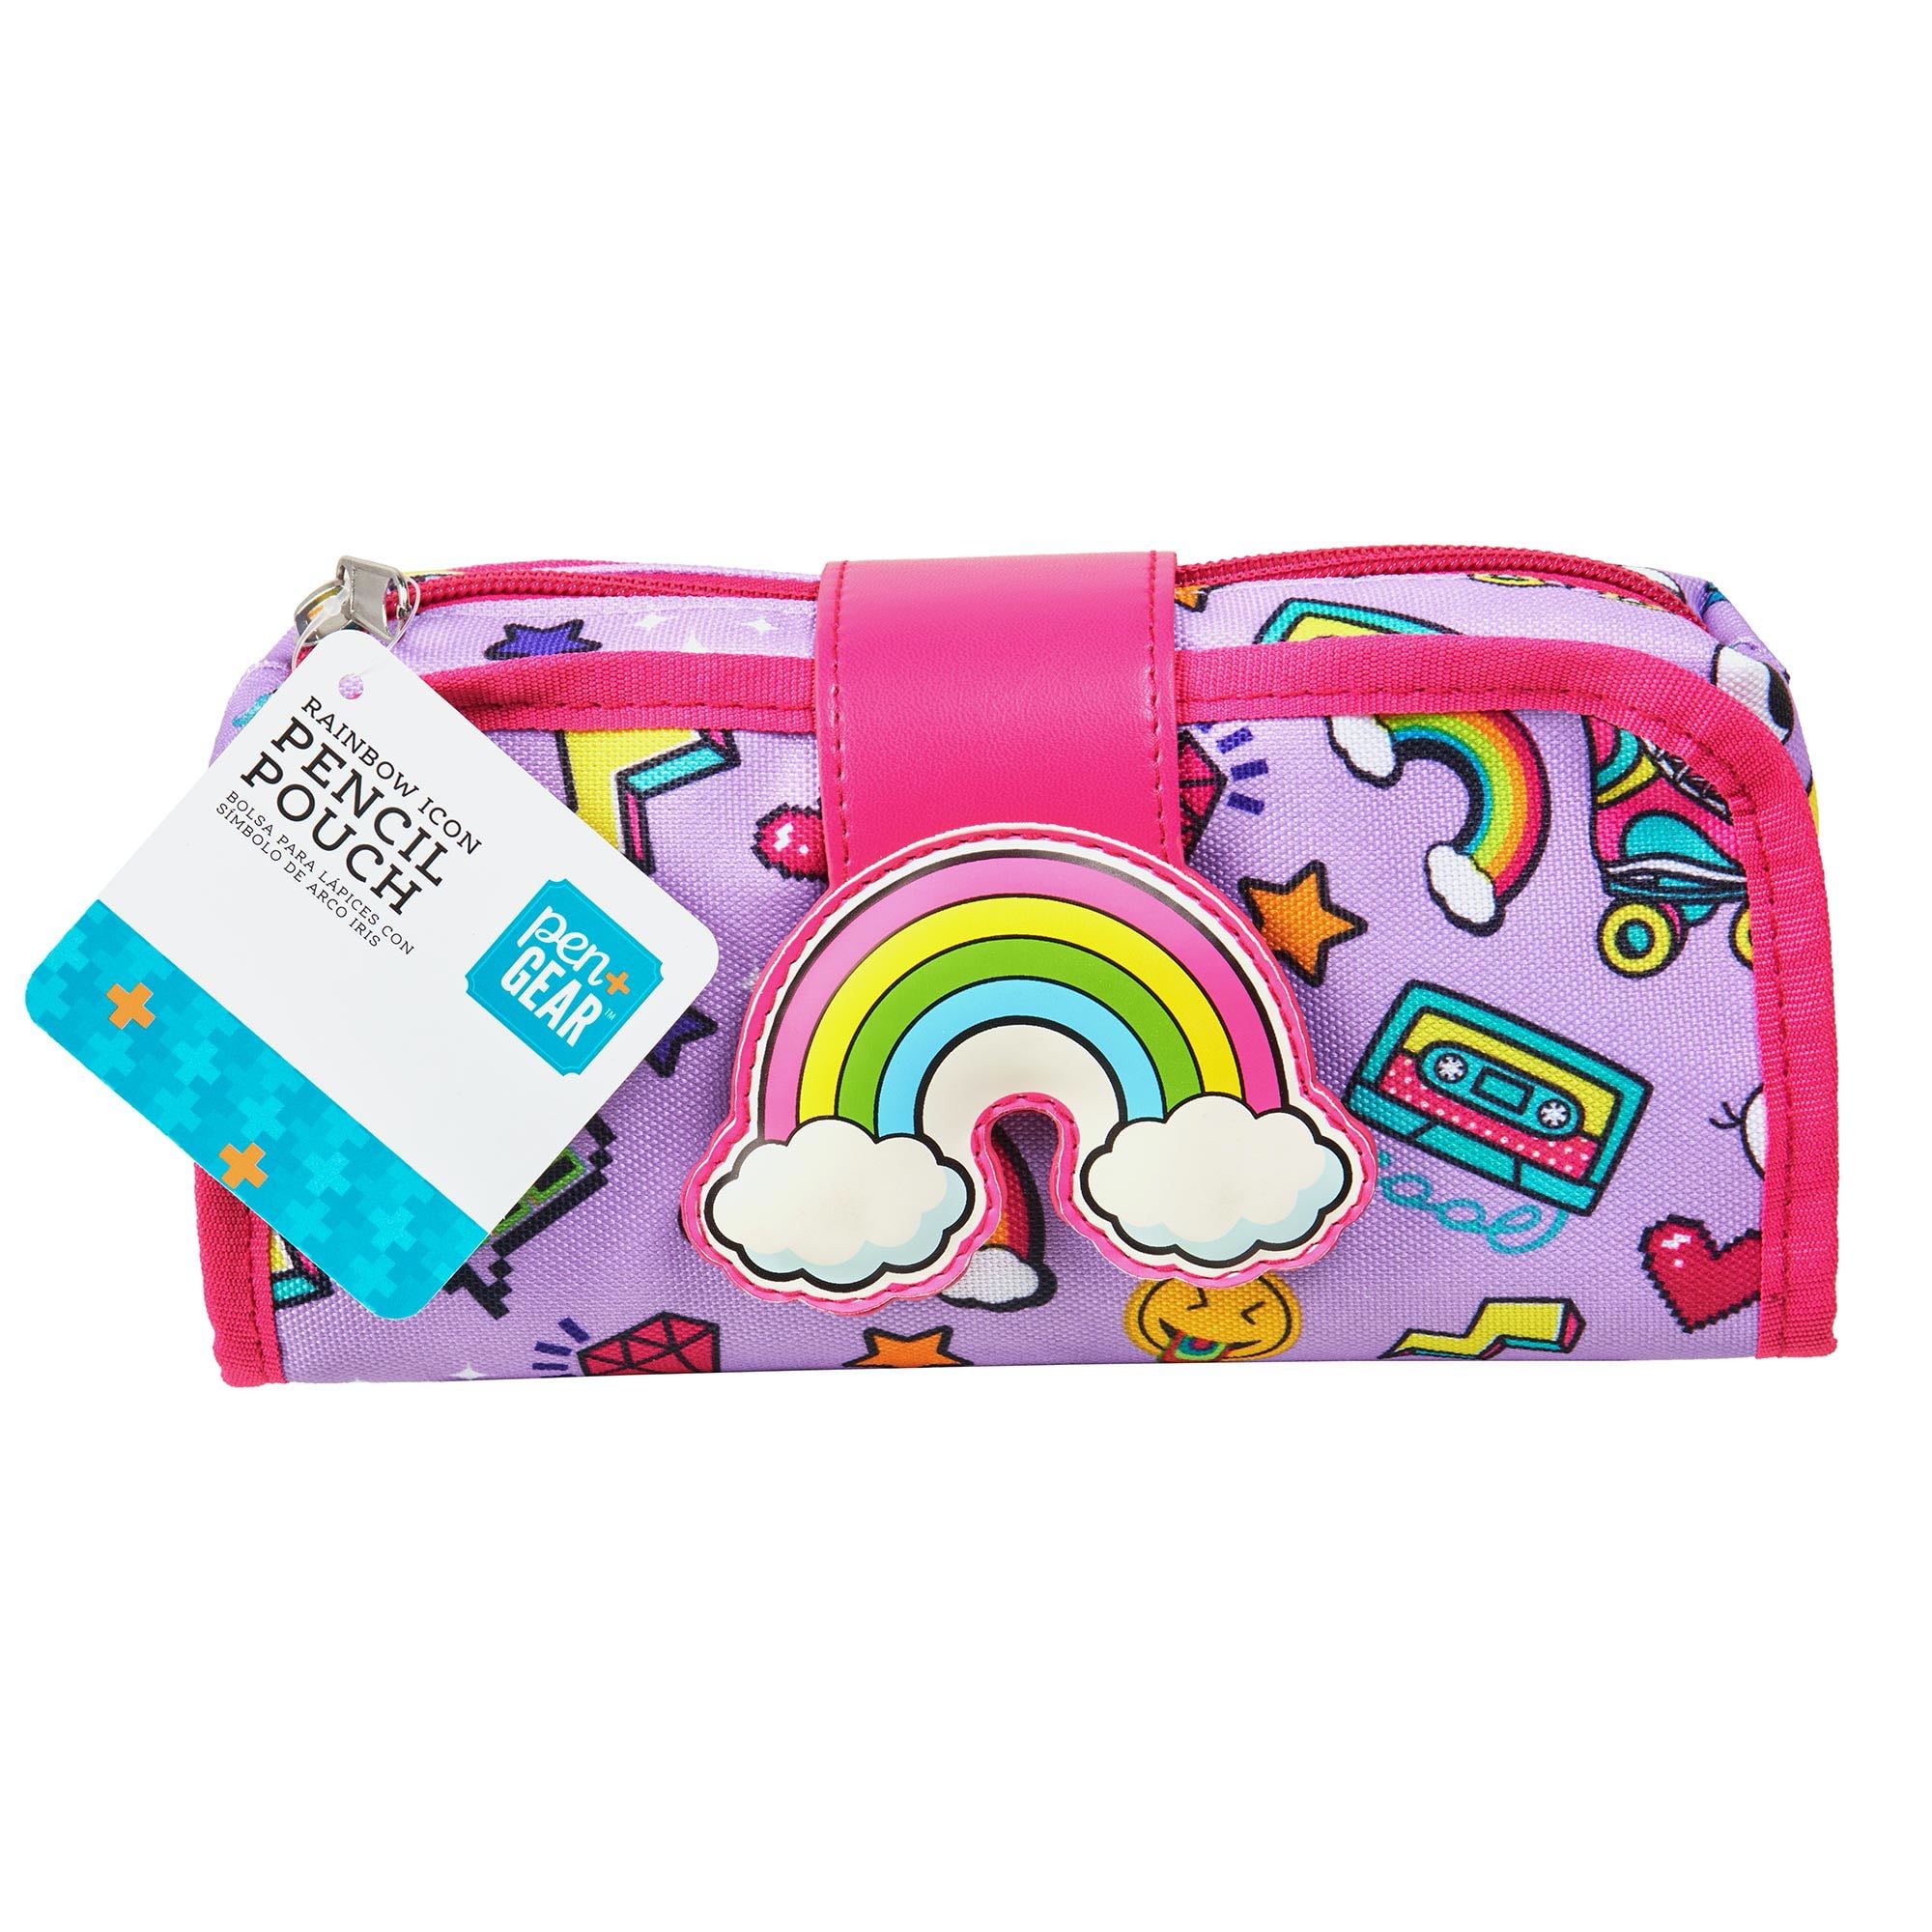 mibasies Pencil Case for Little Girls and Kids Pen Pouch, Pink Purple Rainbow